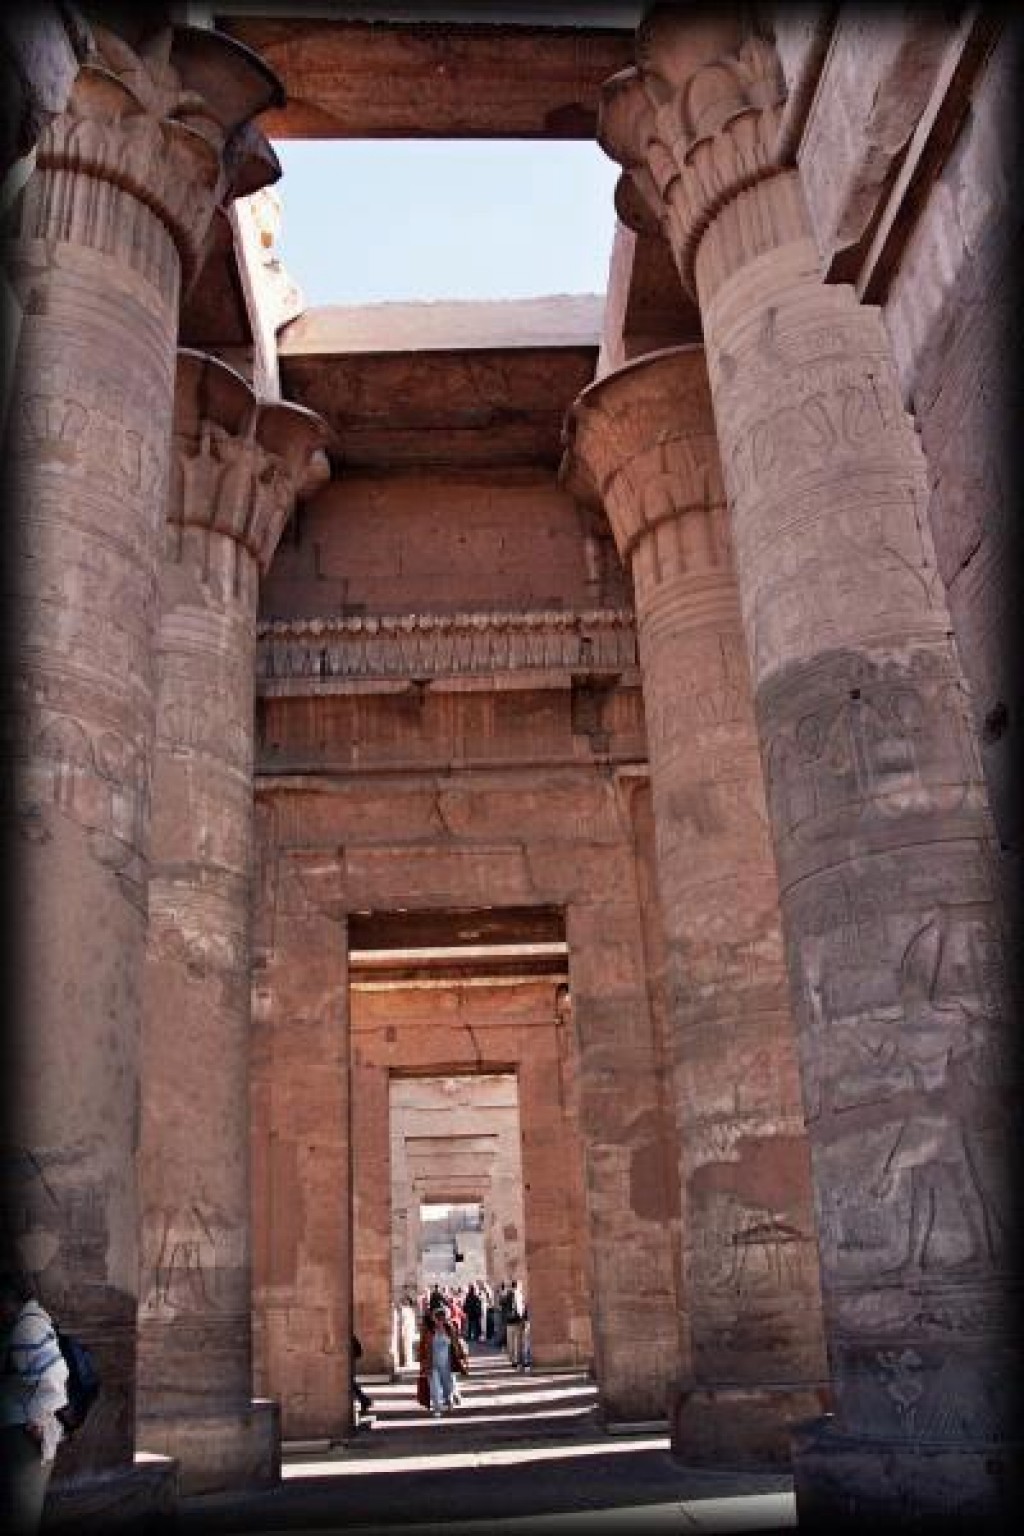 Kom Ombo is located on a bend in the river Nile about 50 km north of Aswan.  The temple is dedicated to the crocodile god Sobek and the falcon god Haroeris (Horus the Elder).
